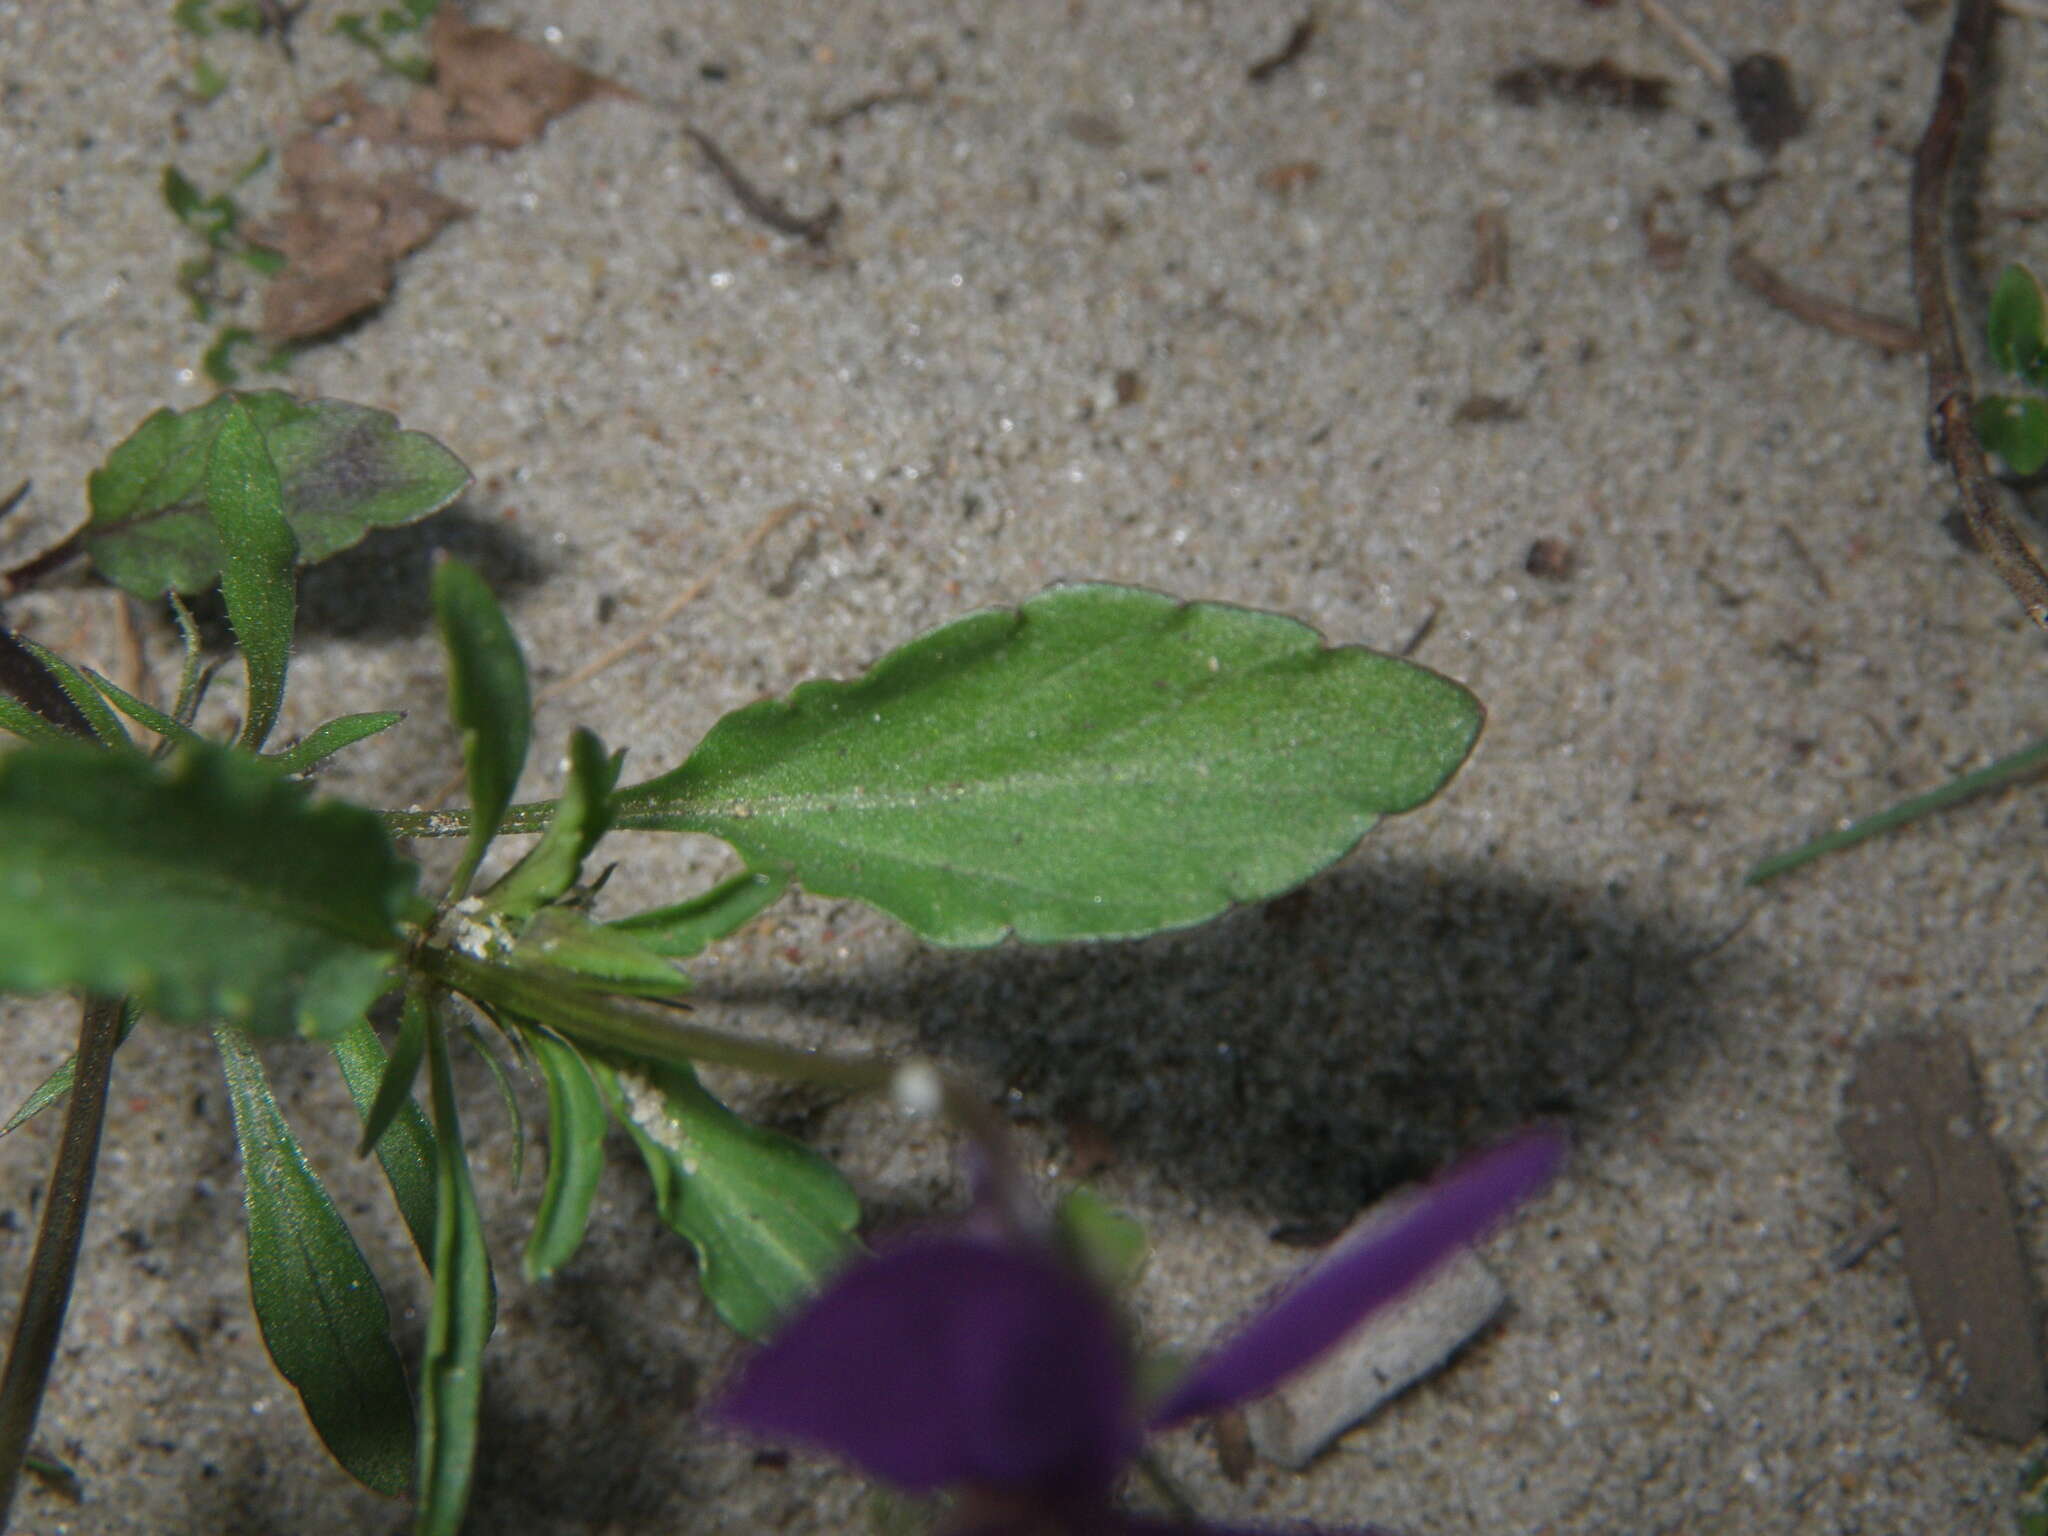 Image of Viola tricolor subsp. curtisii (E. Forster) Syme